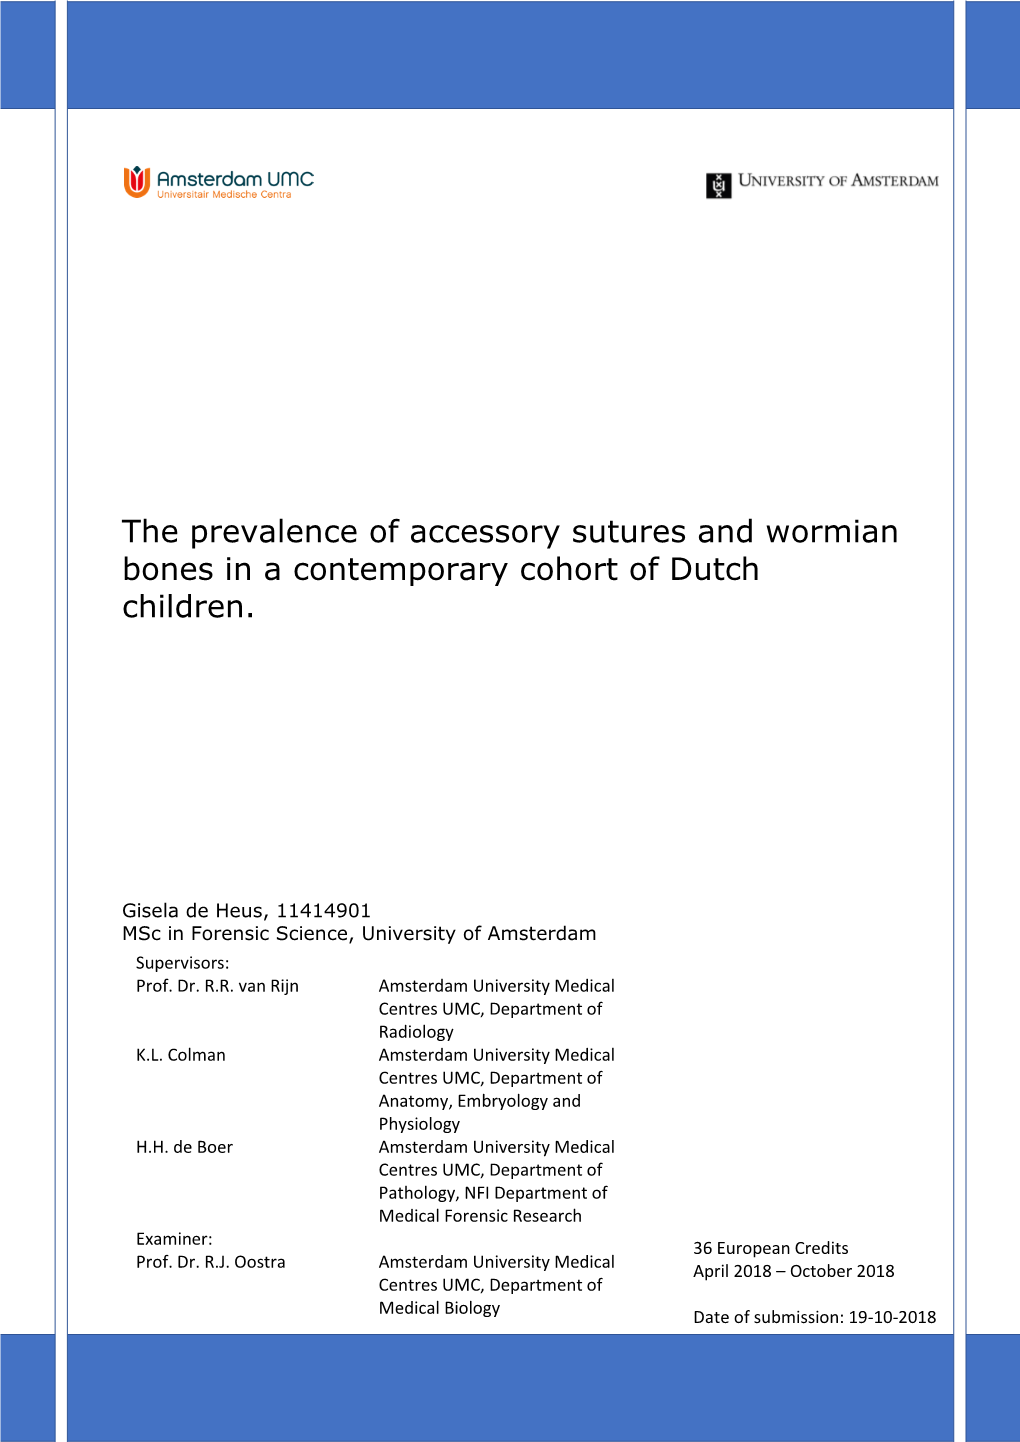 The Prevalence of Accessory Sutures and Wormian Bones in a Contemporary Cohort of Dutch Children